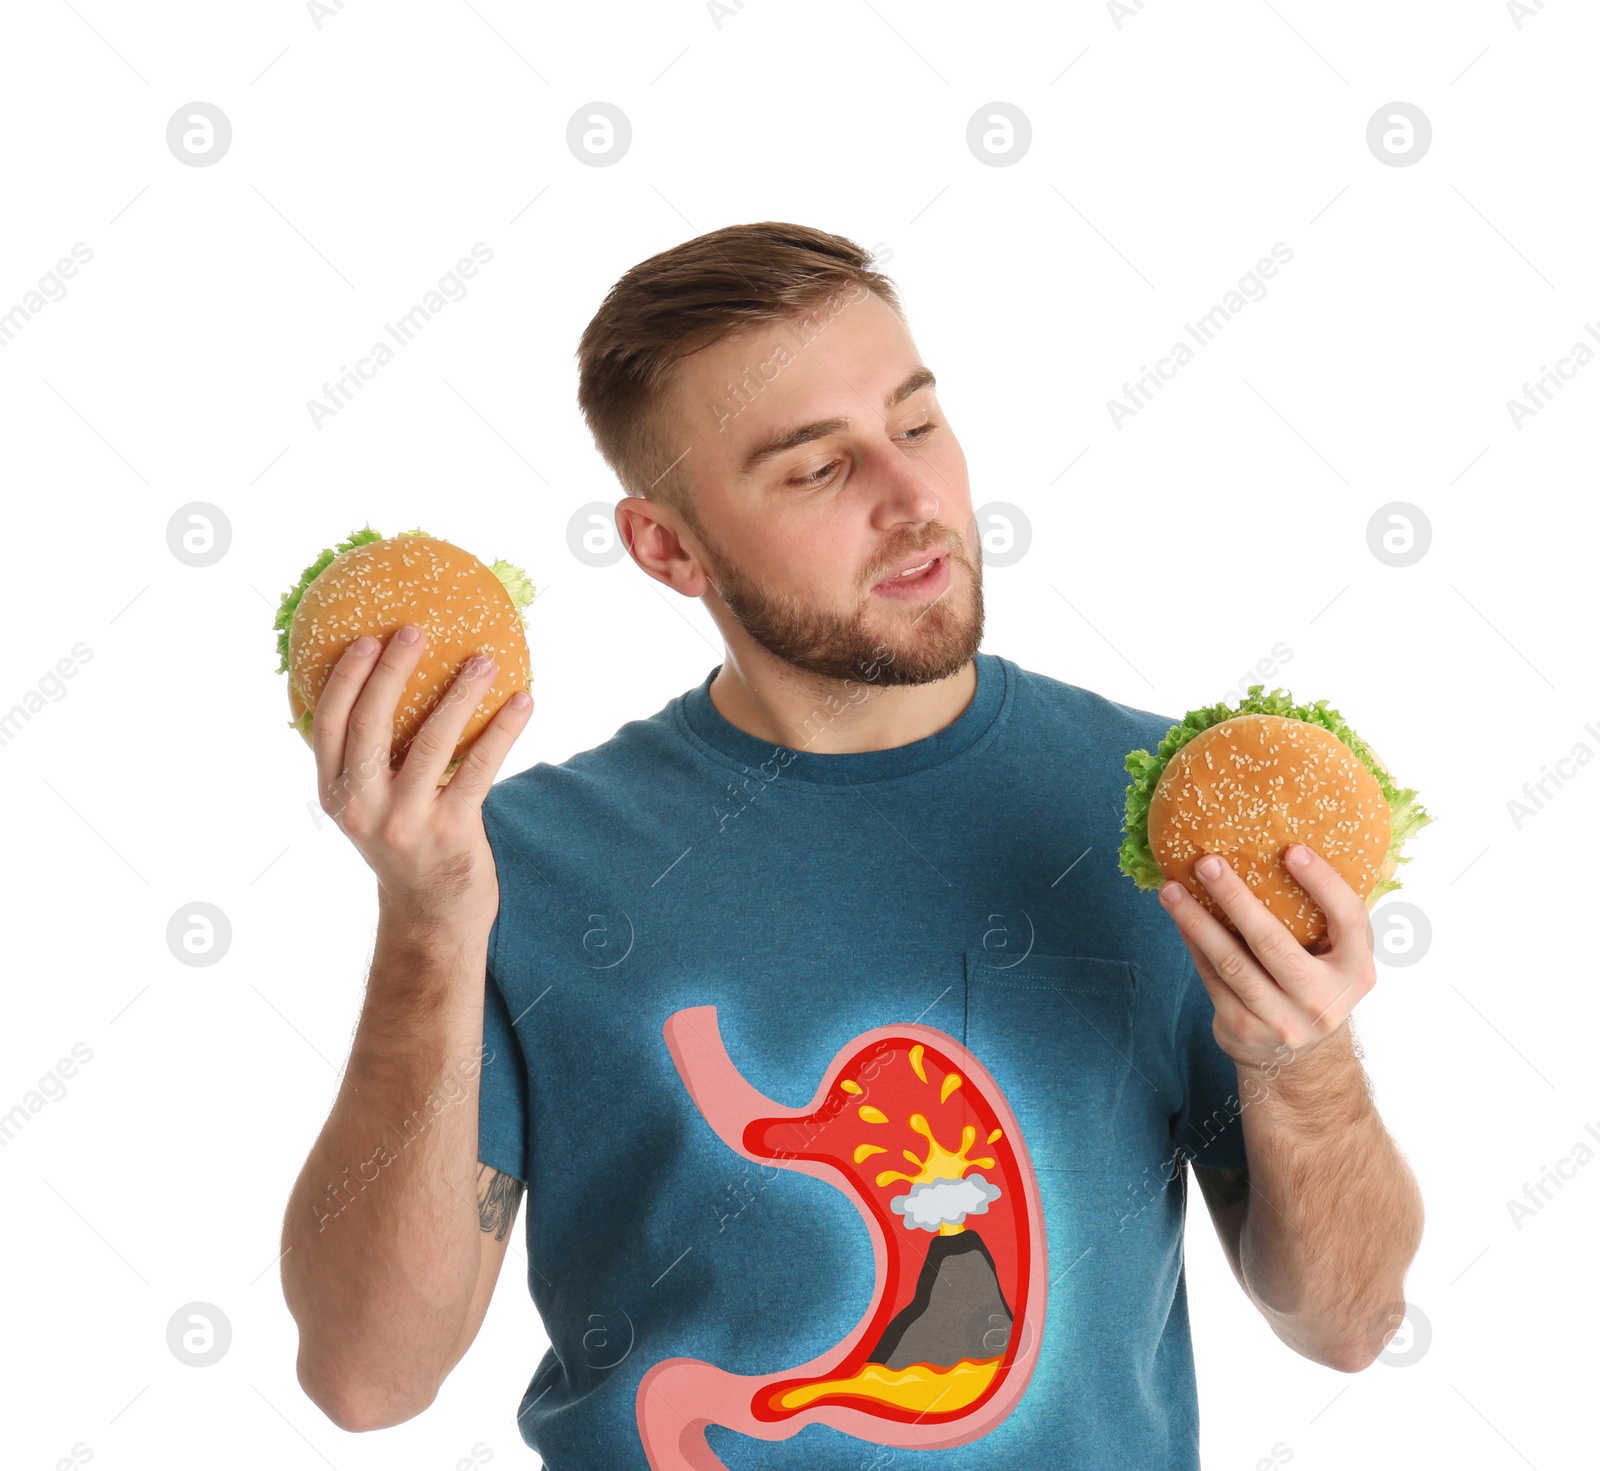 Image of Improper nutrition can lead to heartburn or other gastrointestinal problems. Man with burgers on white background. Illustration of stomach with erupting volcano as acid indigestion